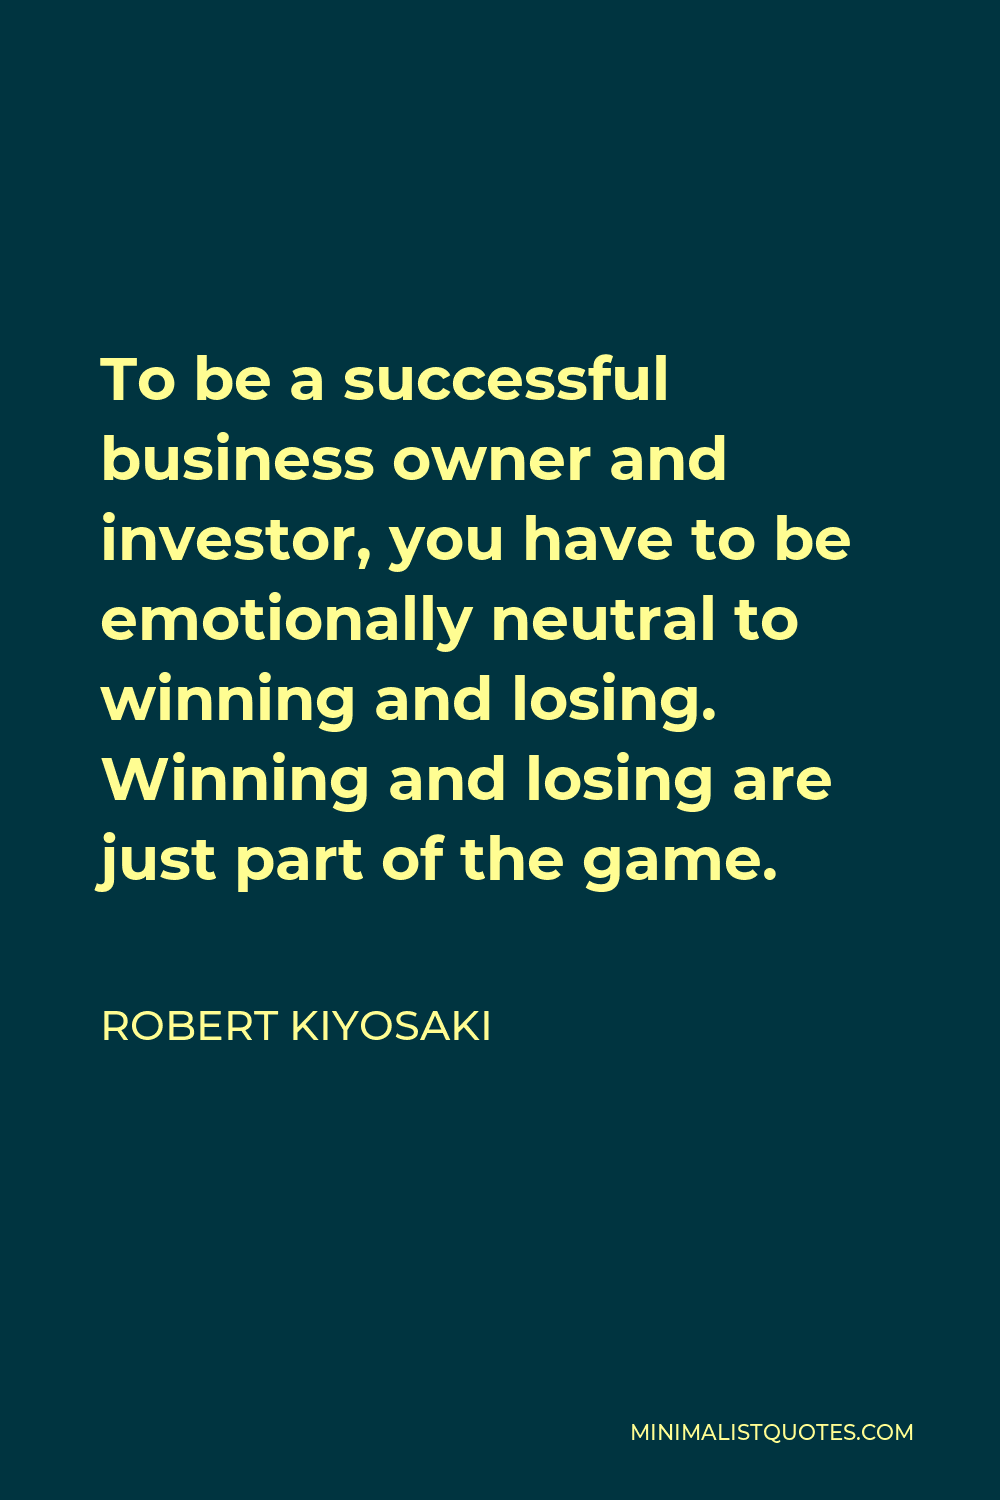 Robert Kiyosaki Quote - To be a successful business owner and investor, you have to be emotionally neutral to winning and losing. Winning and losing are just part of the game.